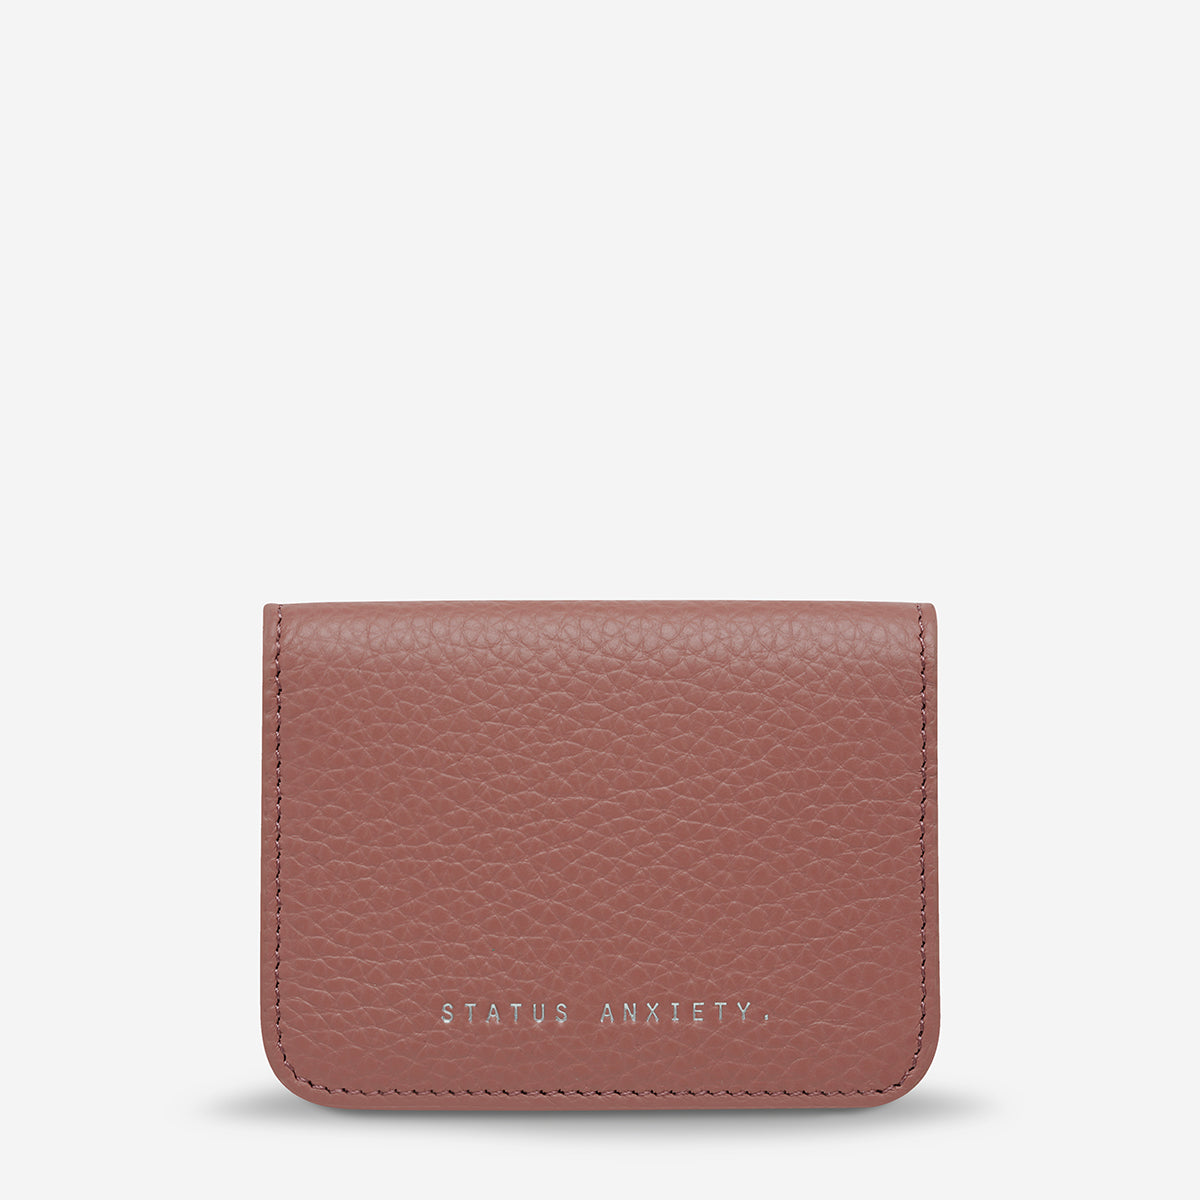 Status Anxiety Miles Away Women's Leather Wallet Dusty Rose